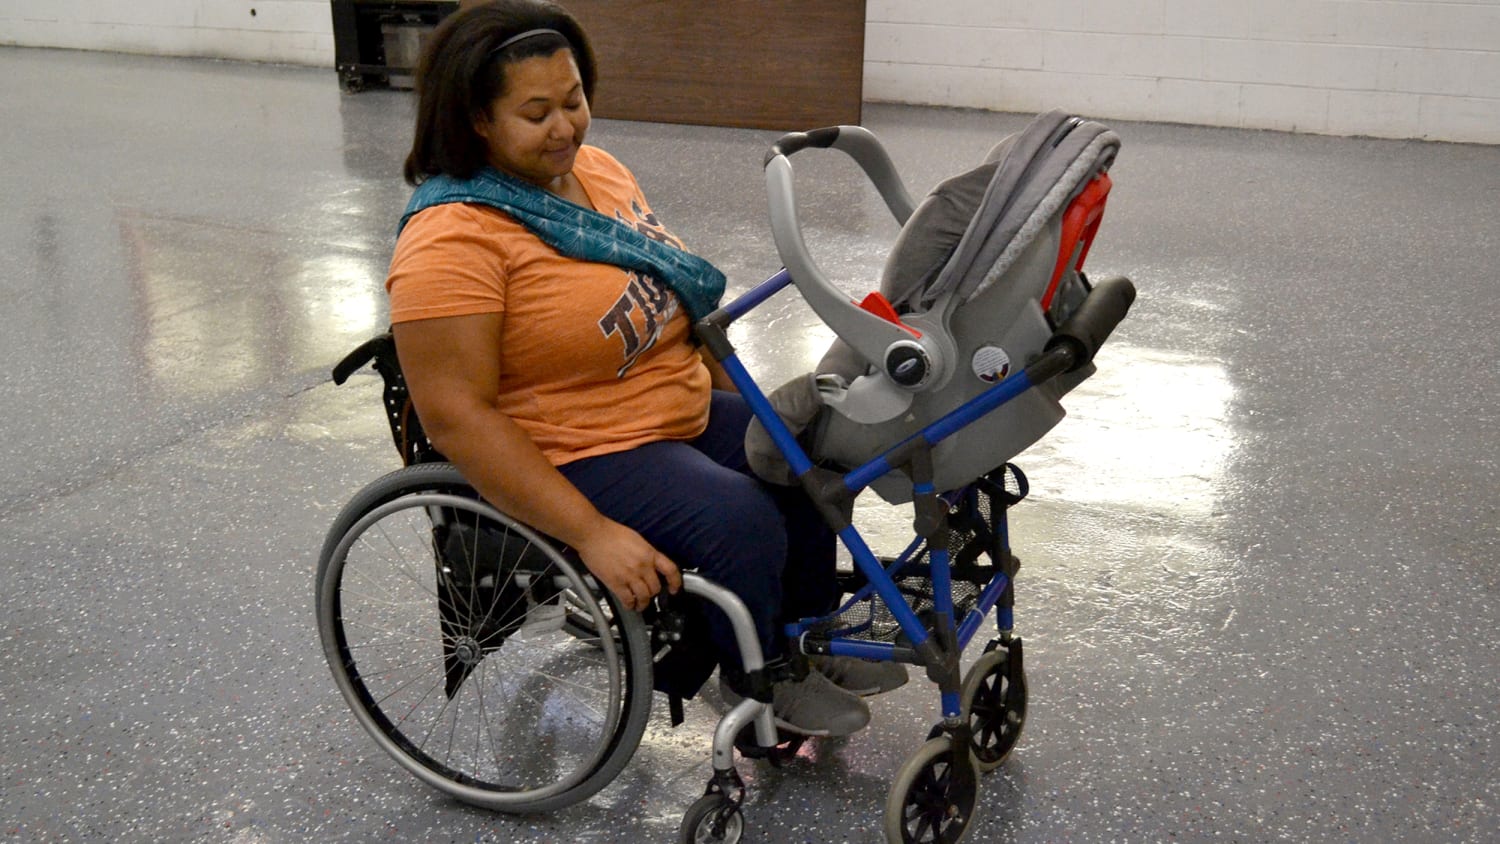 buggy for disabled child and baby